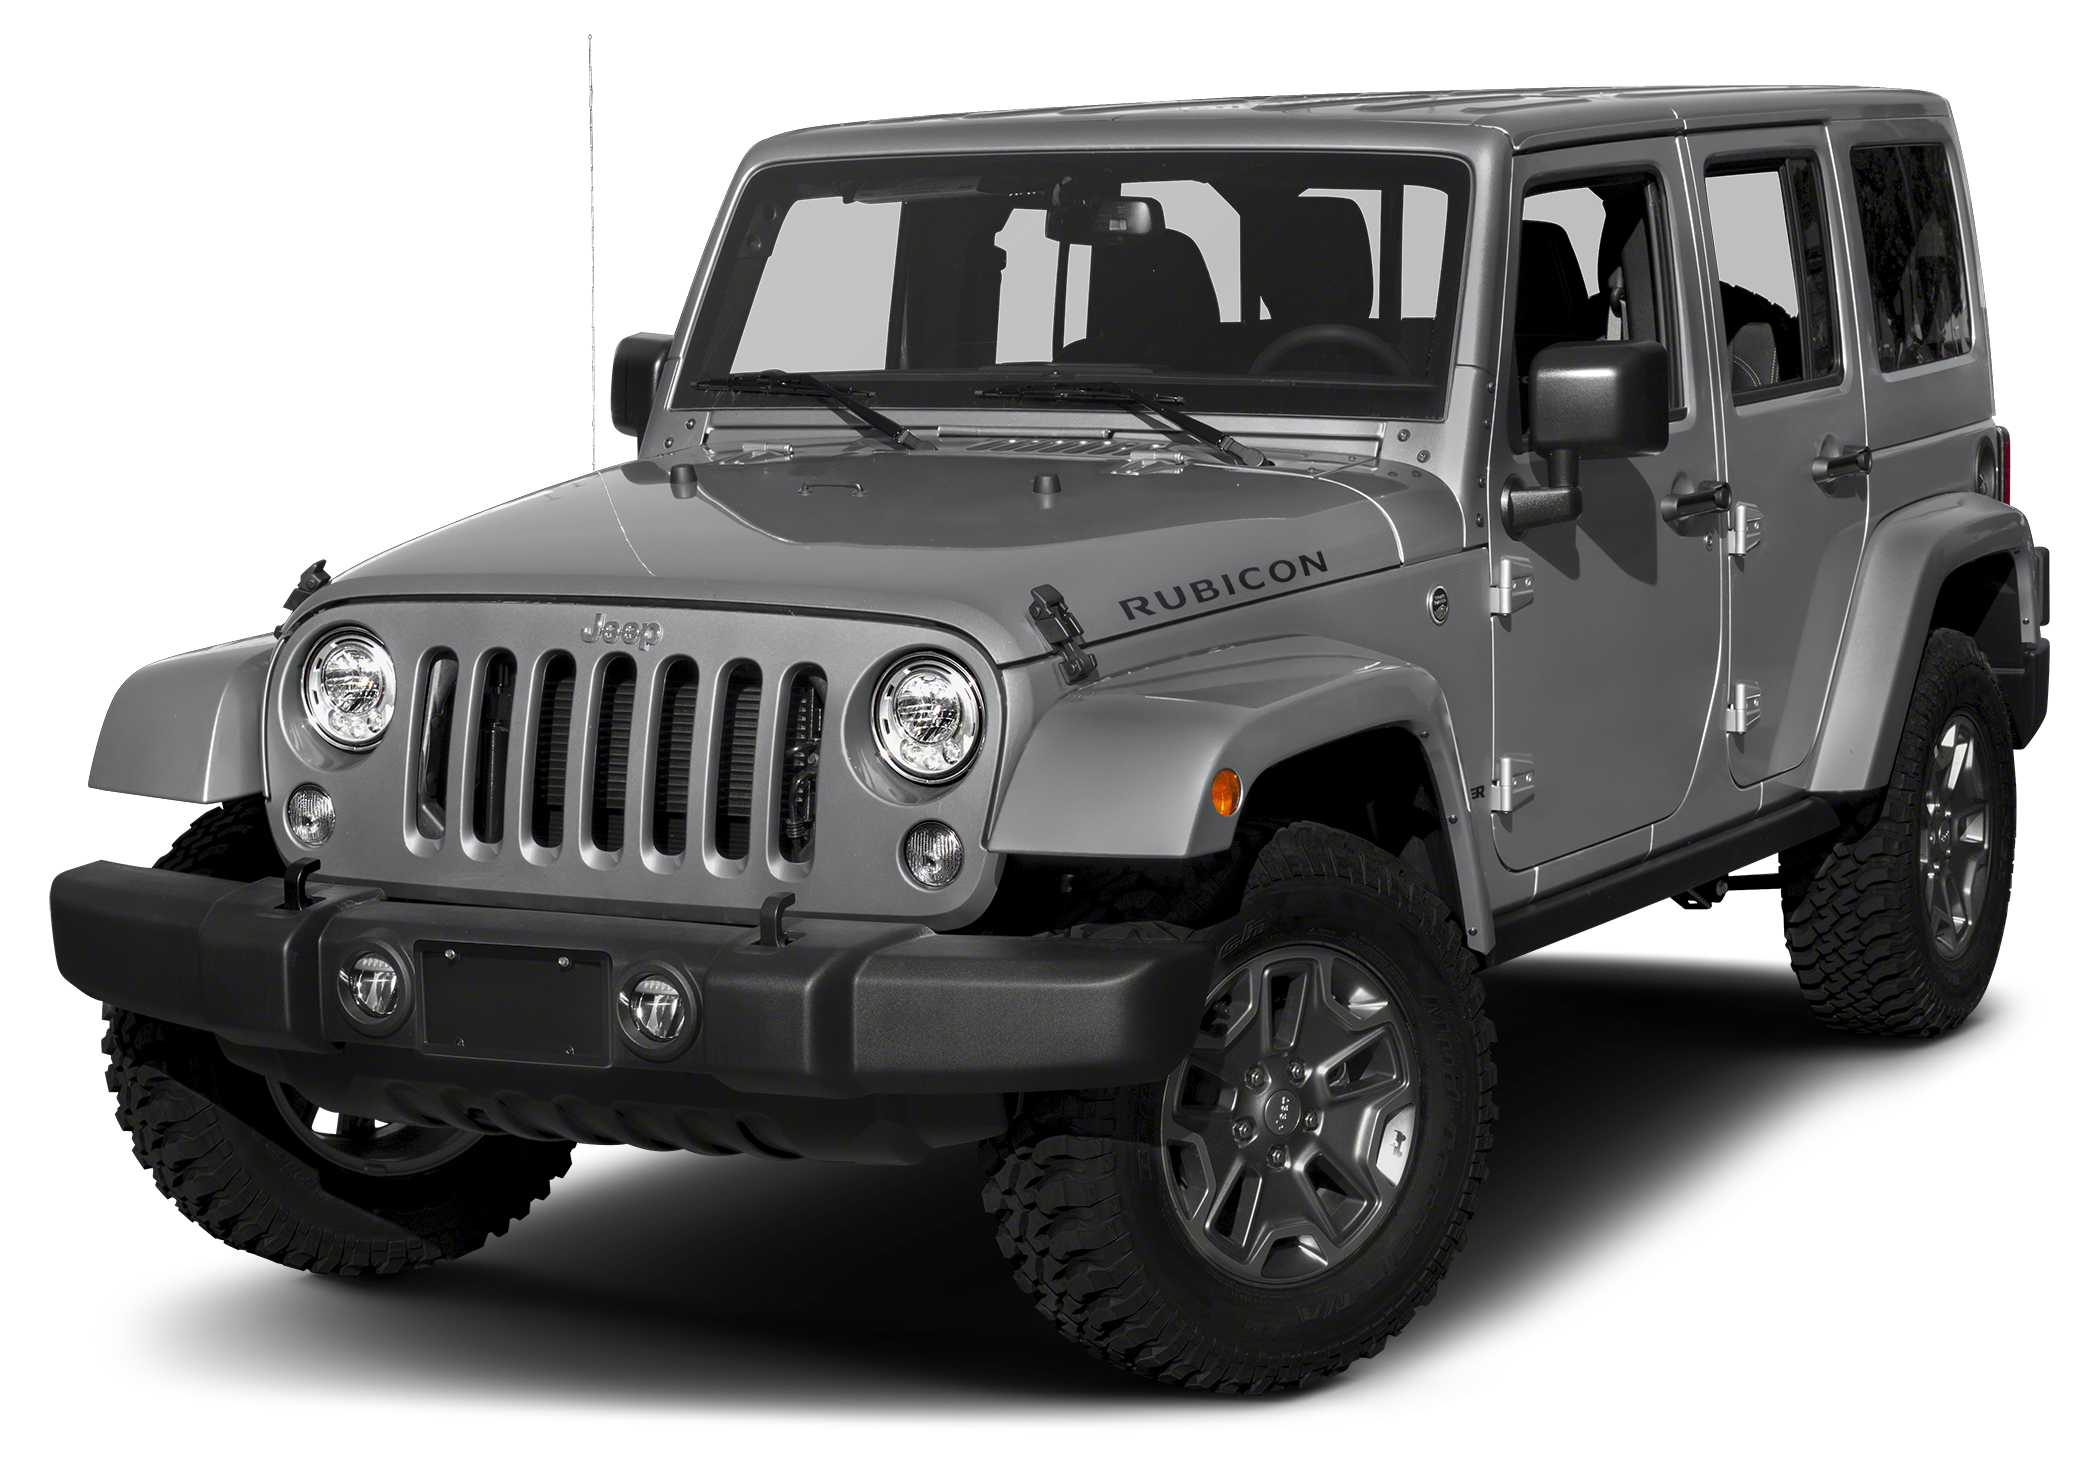 Used 2018 Jeep Wrangler JK Unlimited for Sale Near Me | Cars.com